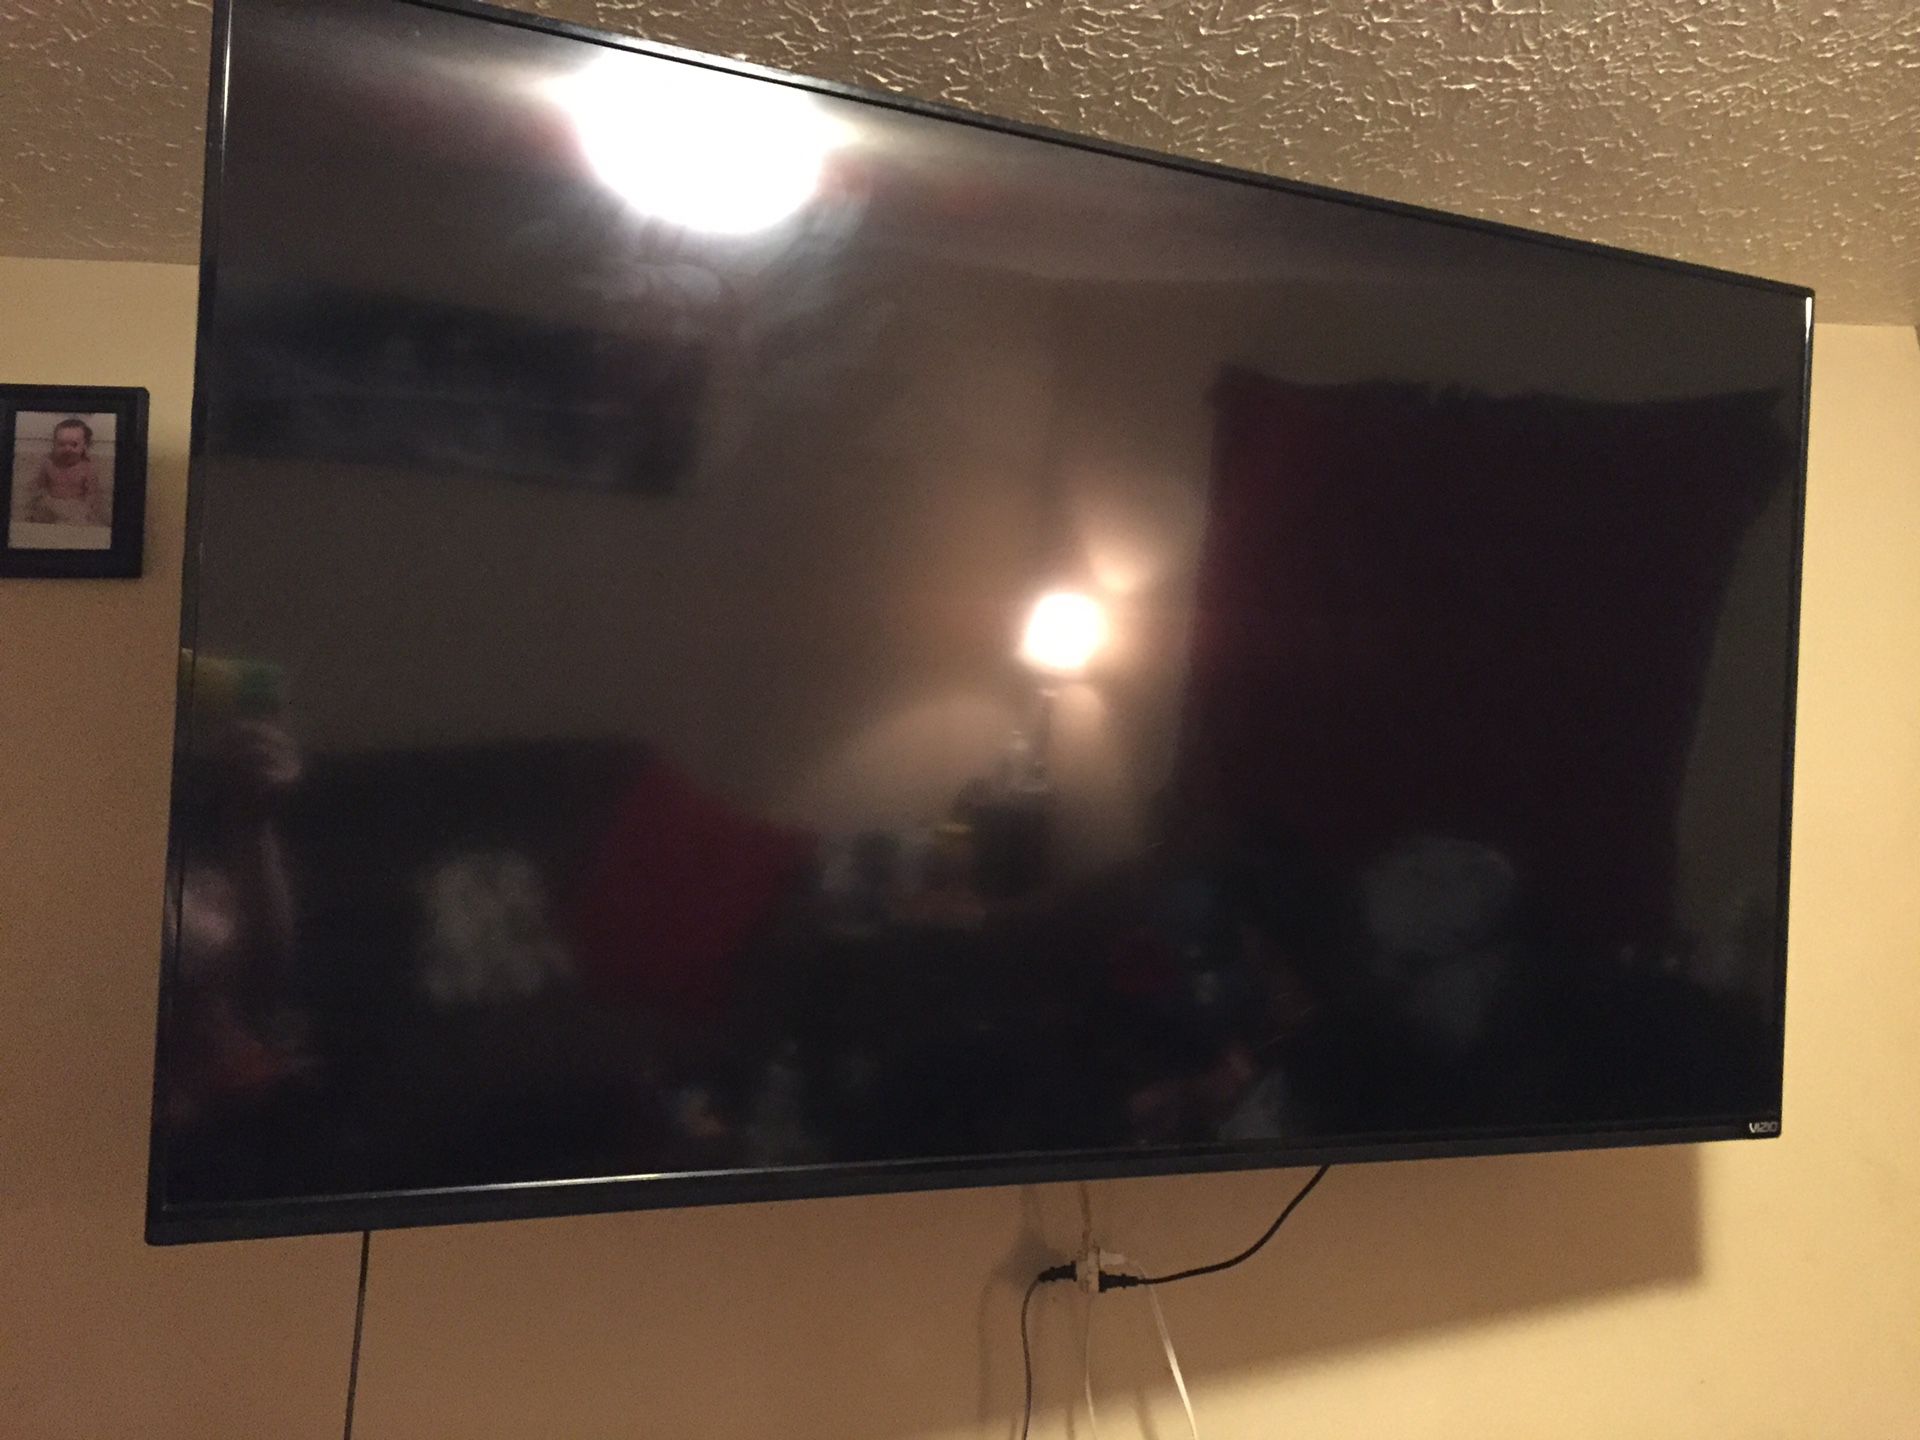 60 in Vizio smart TV with Wall Mount